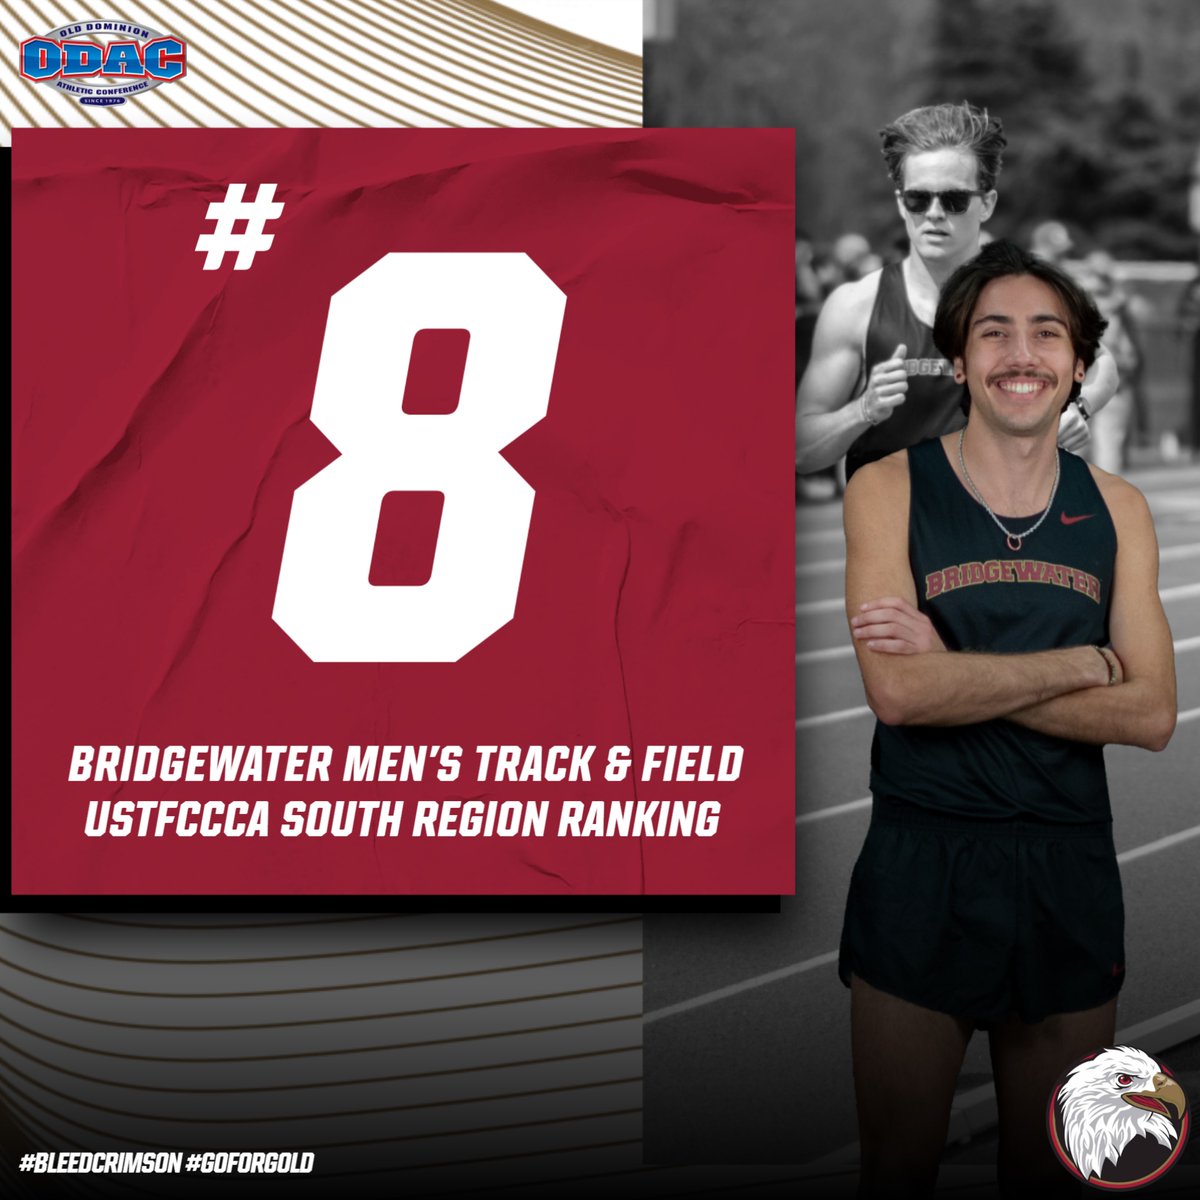 It's great to be number 8⃣! Both @BCXCTF programs ranked eighth in this week's USTFCCCA South Region ranking after the team competed in its first meet since the ODAC Championships. #BleedCrimson #GoForGold 🔗: tinyurl.com/mryu5nbv (W) 🔗: tinyurl.com/3vwntrku (M)